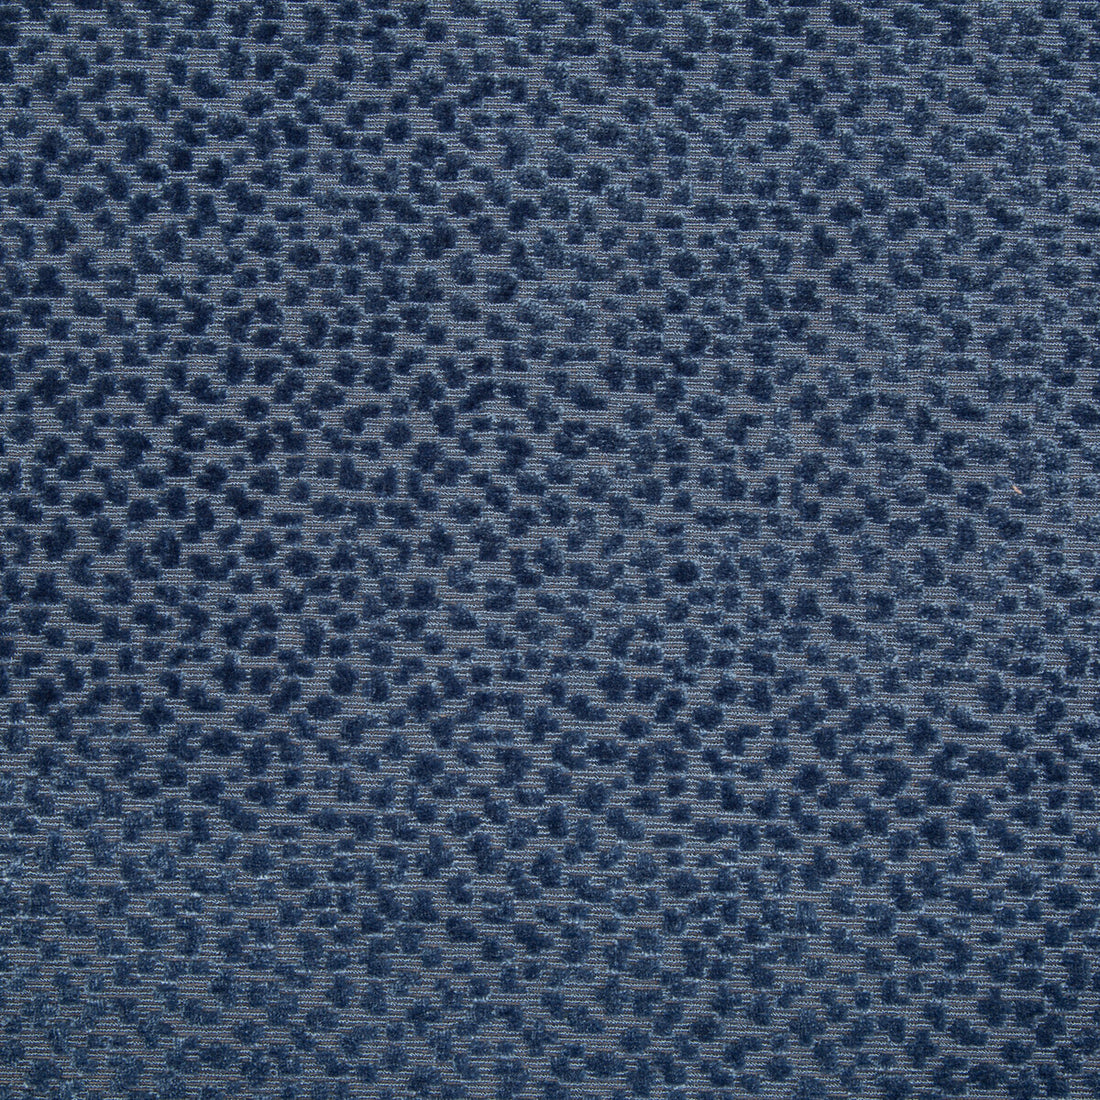 La Panthere Velvet fabric in blue color - pattern 8017126.5.0 - by Brunschwig &amp; Fils in the Les Ensembliers collection